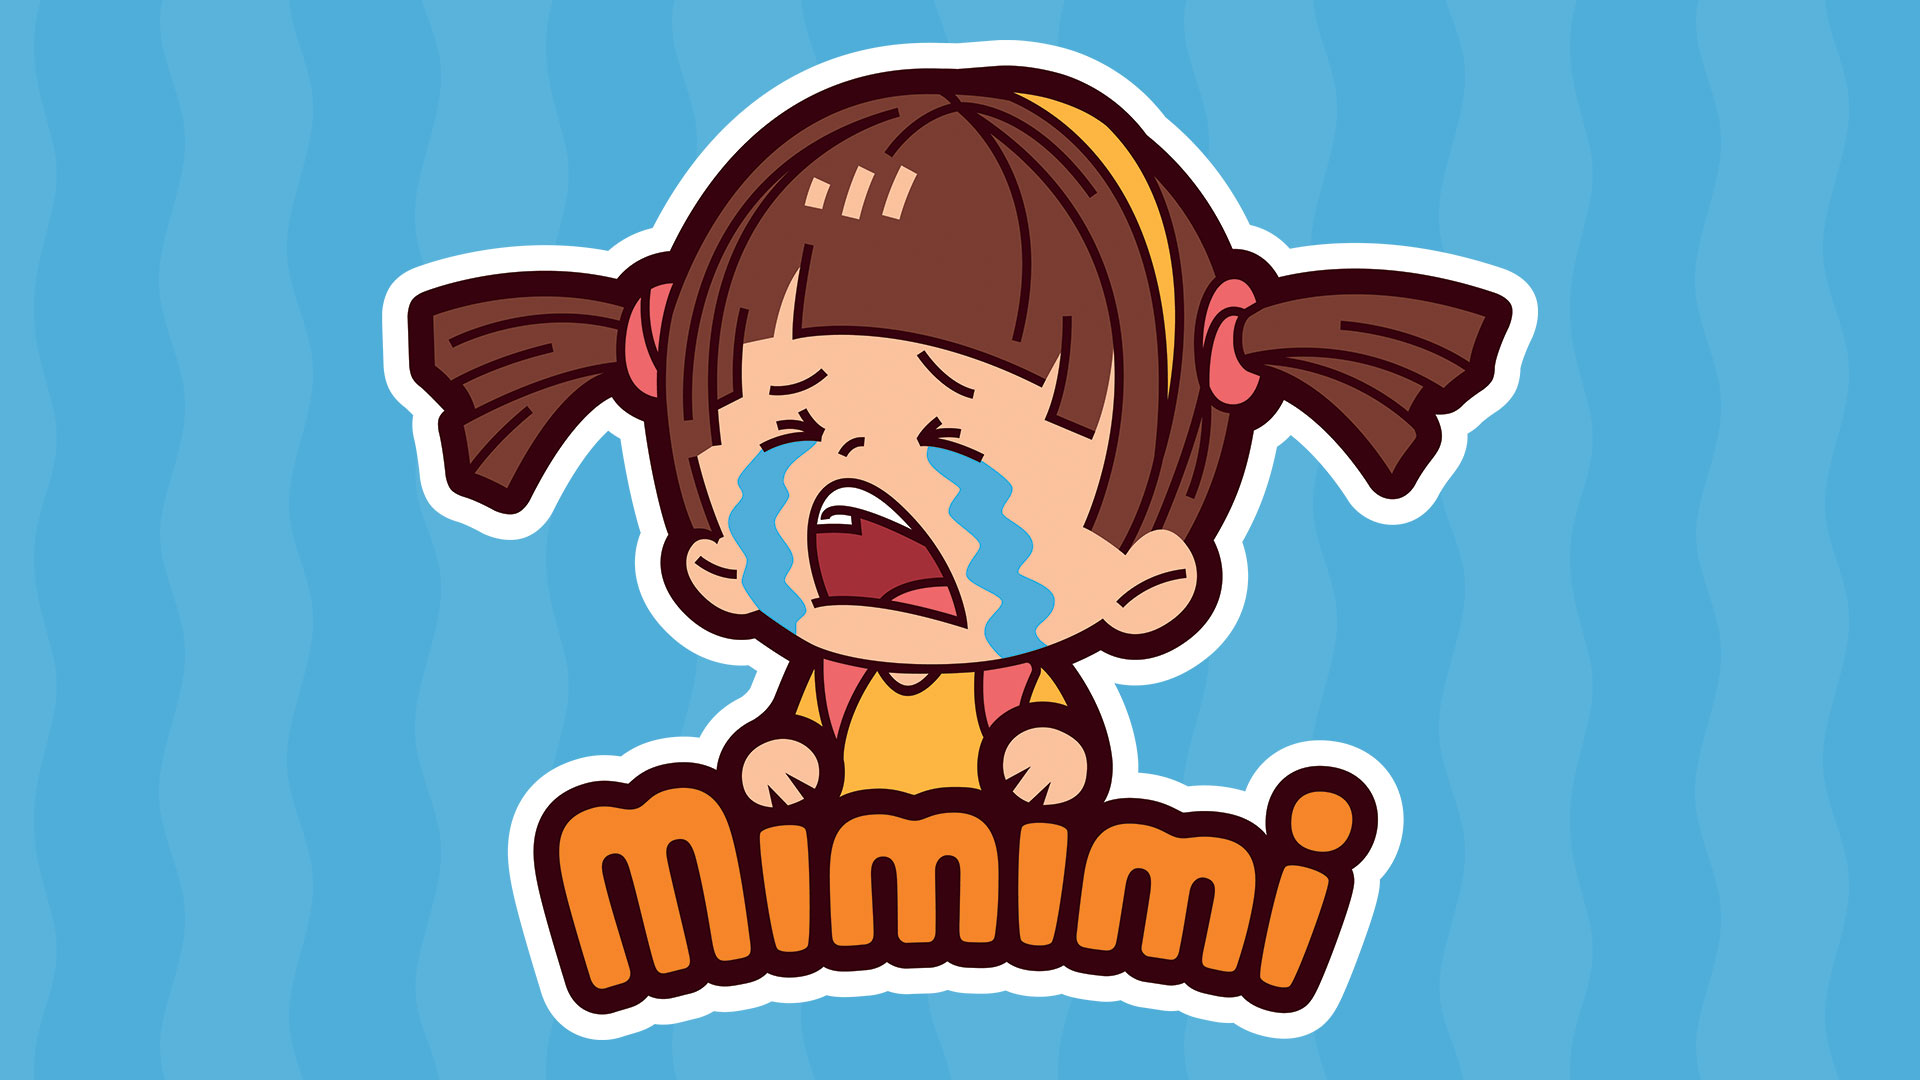 Mimimi Games has announced it is closing up shop